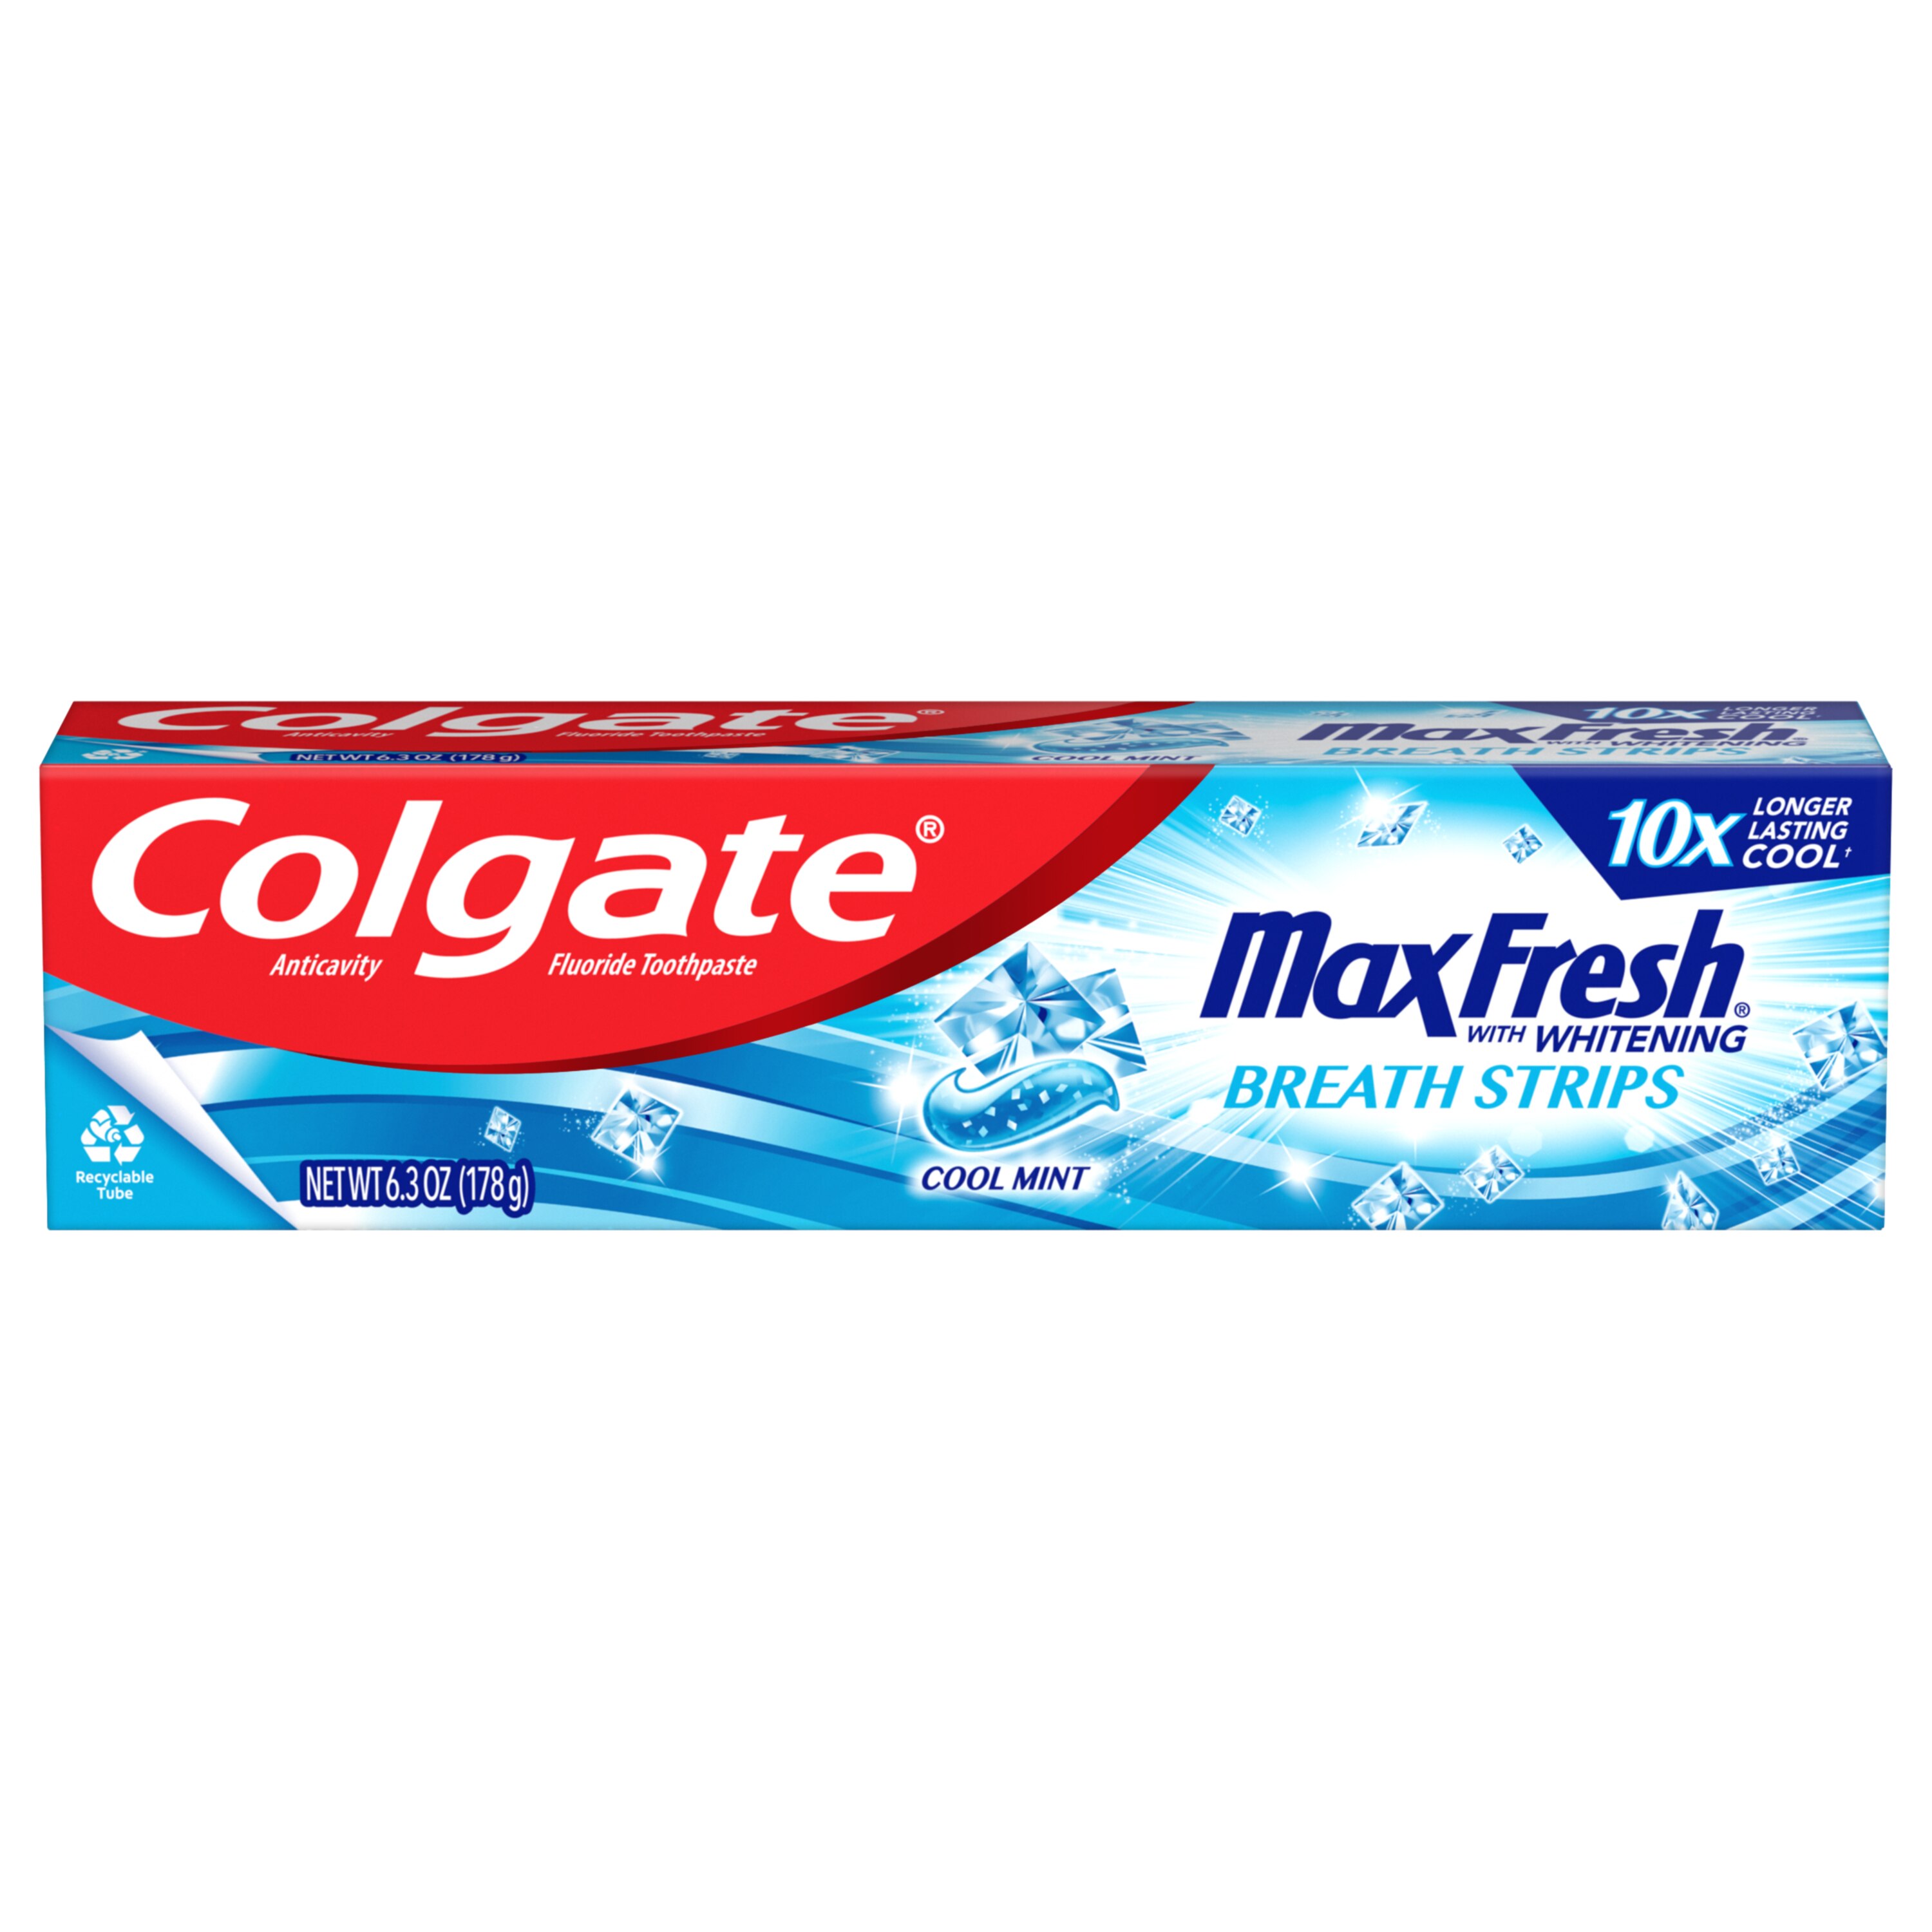 Colgate Max Fresh Whitening Anticavity Fluoride Toothpaste With Breath Strips, Cool Mint, 6.3 OZ, 1 Ct , CVS